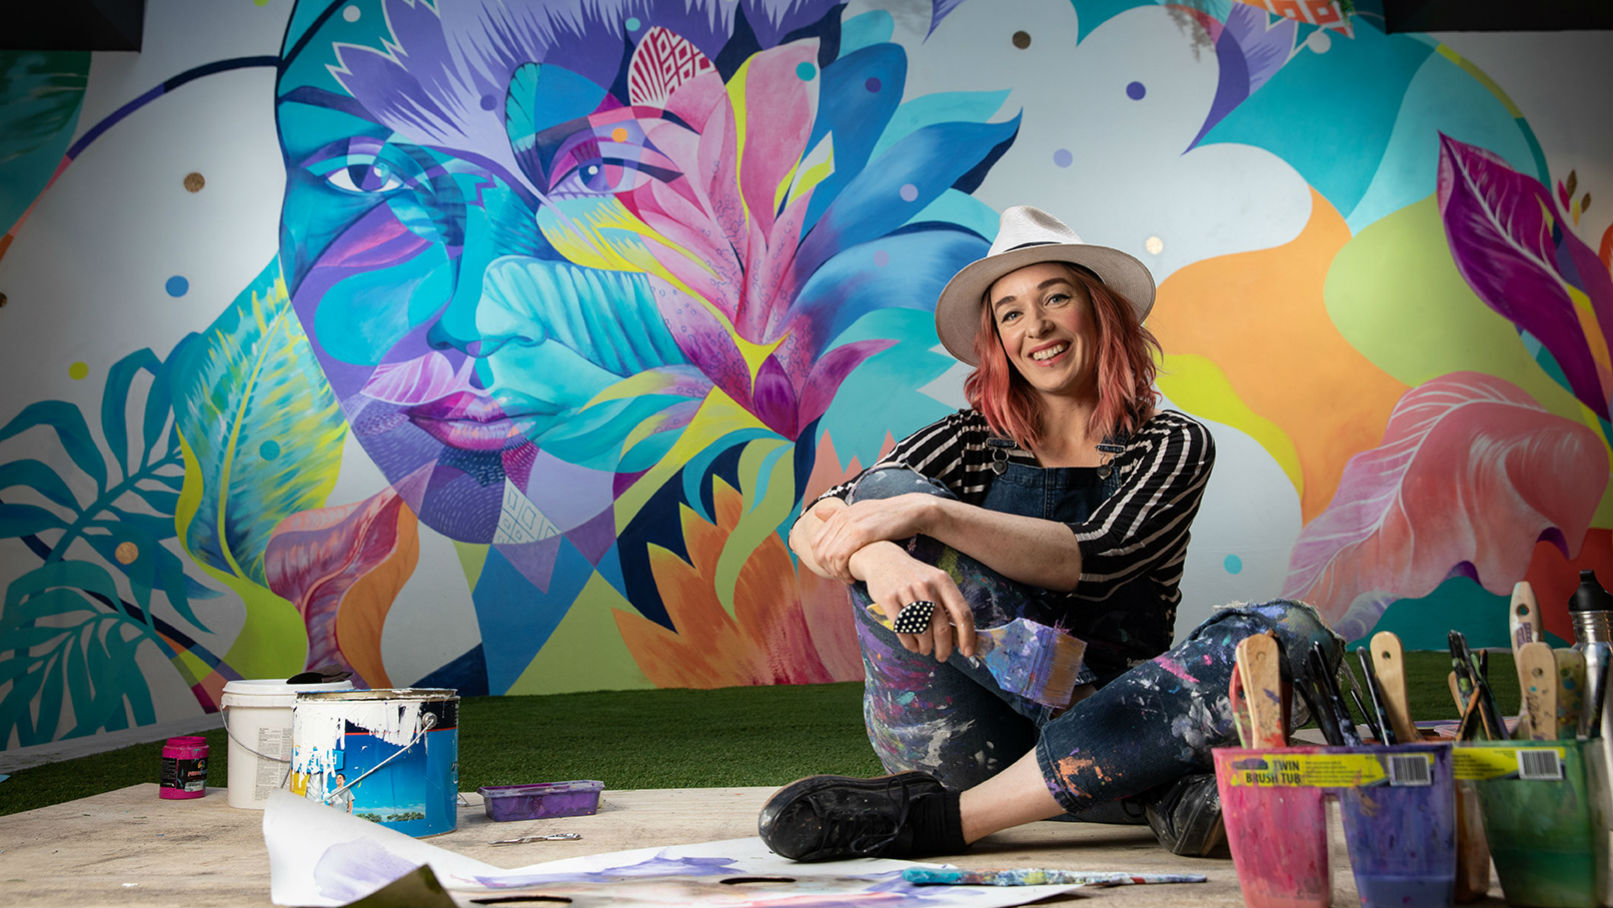 Accomplished international artist, Shannon Crees at the completion of her latest large scale mural work in our new Leichhardt branch.